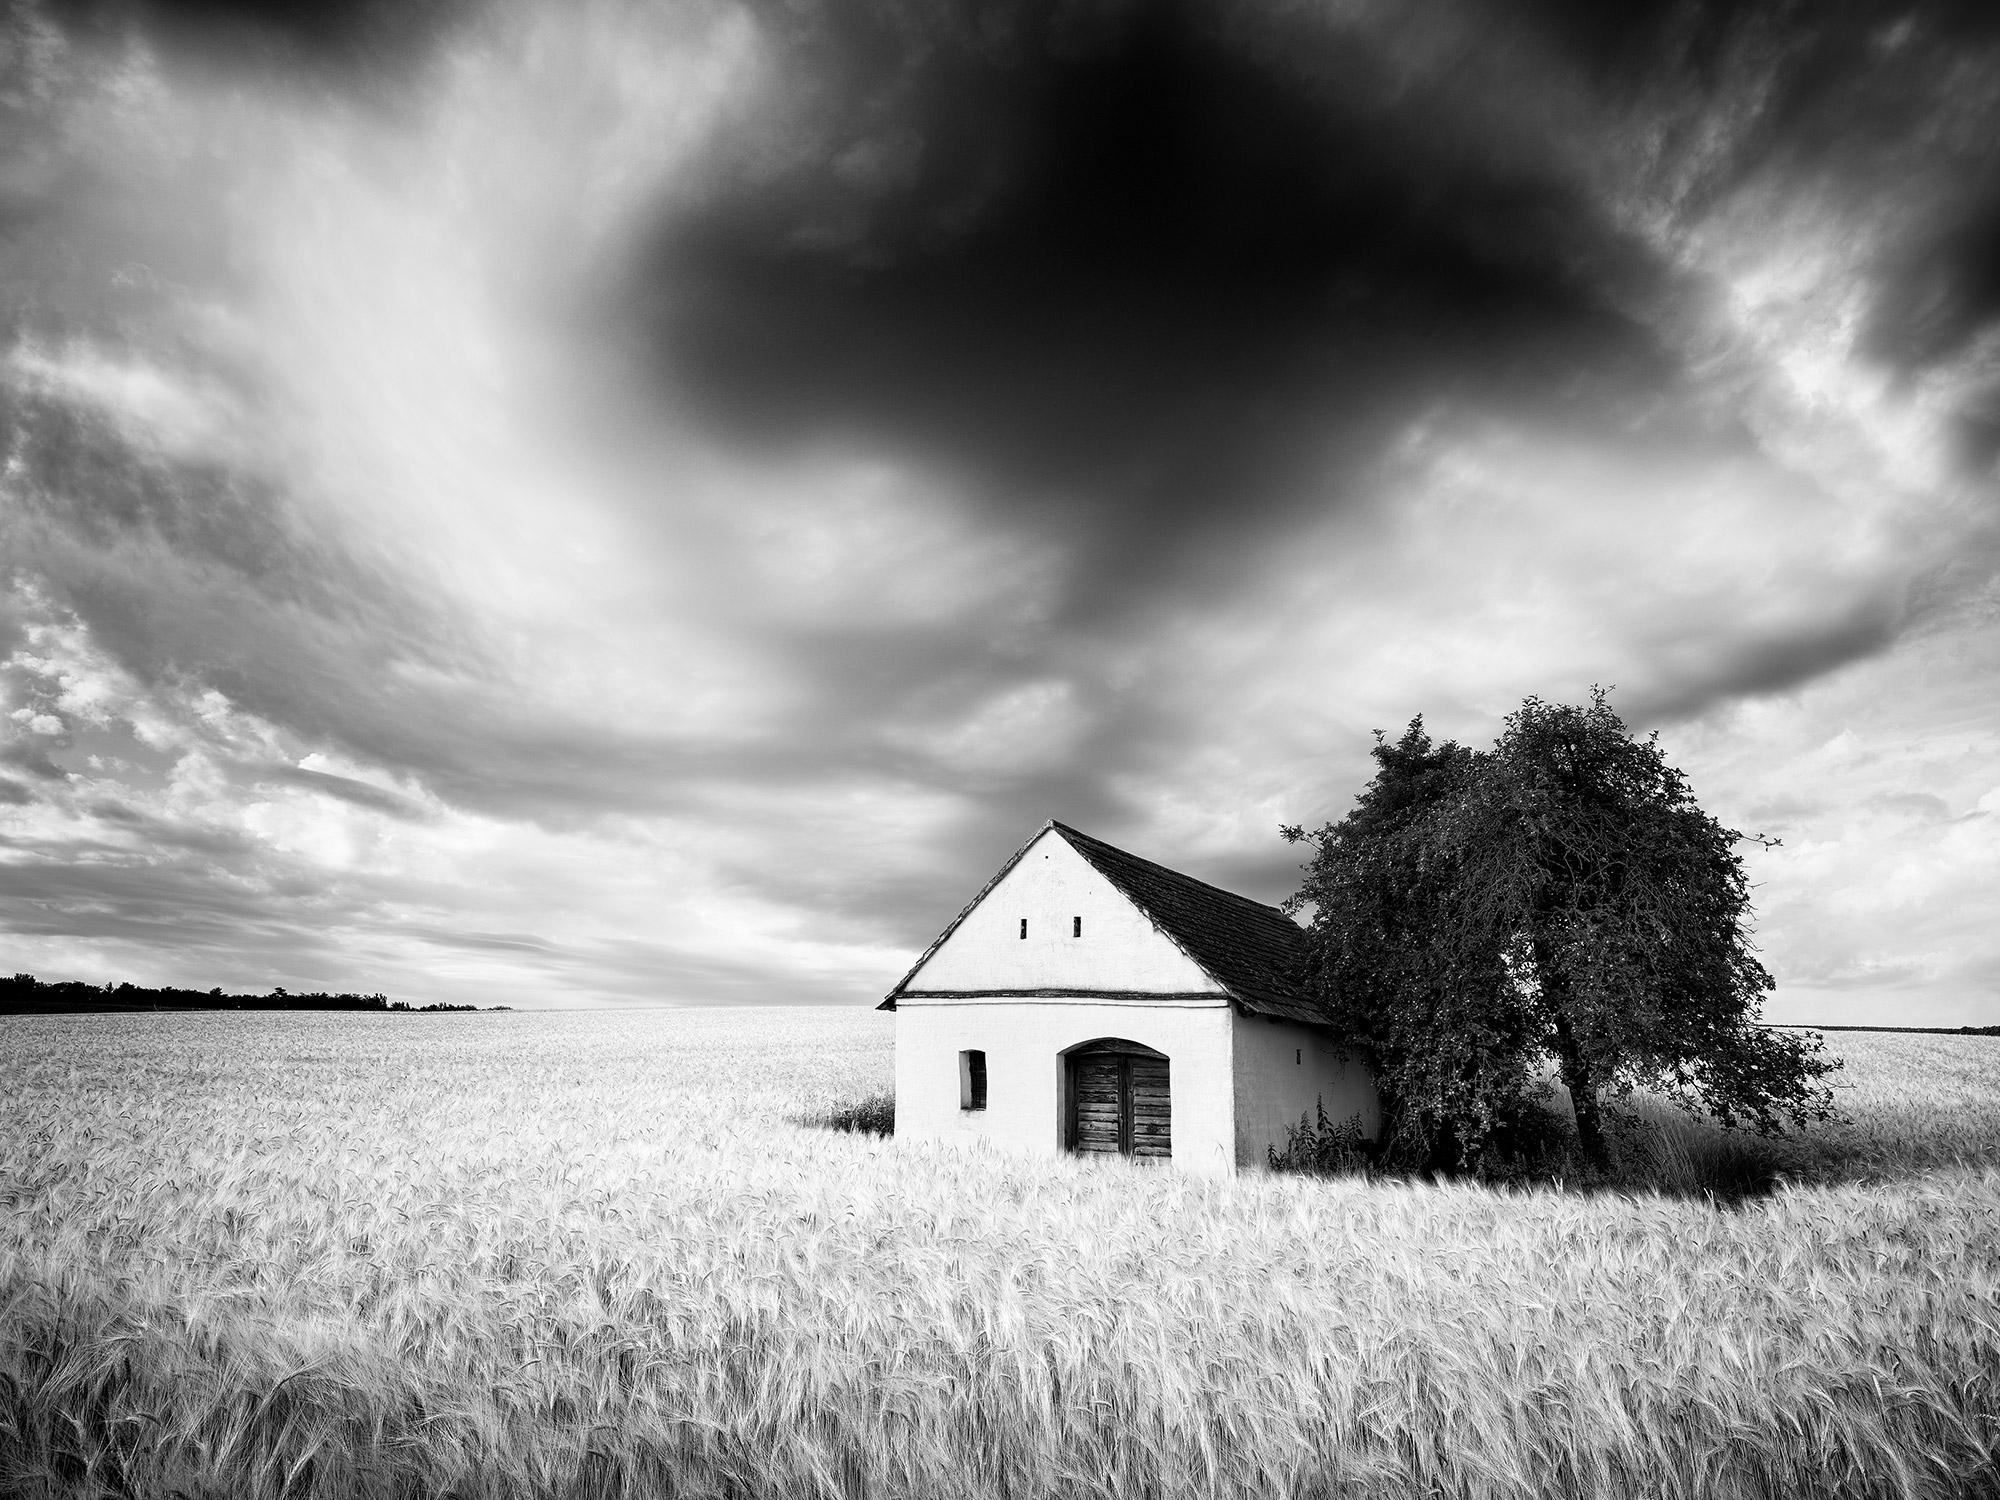 Gerald Berghammer Black and White Photograph - Wine Press House, wheat field, heavy cloud, black & white landscape photography